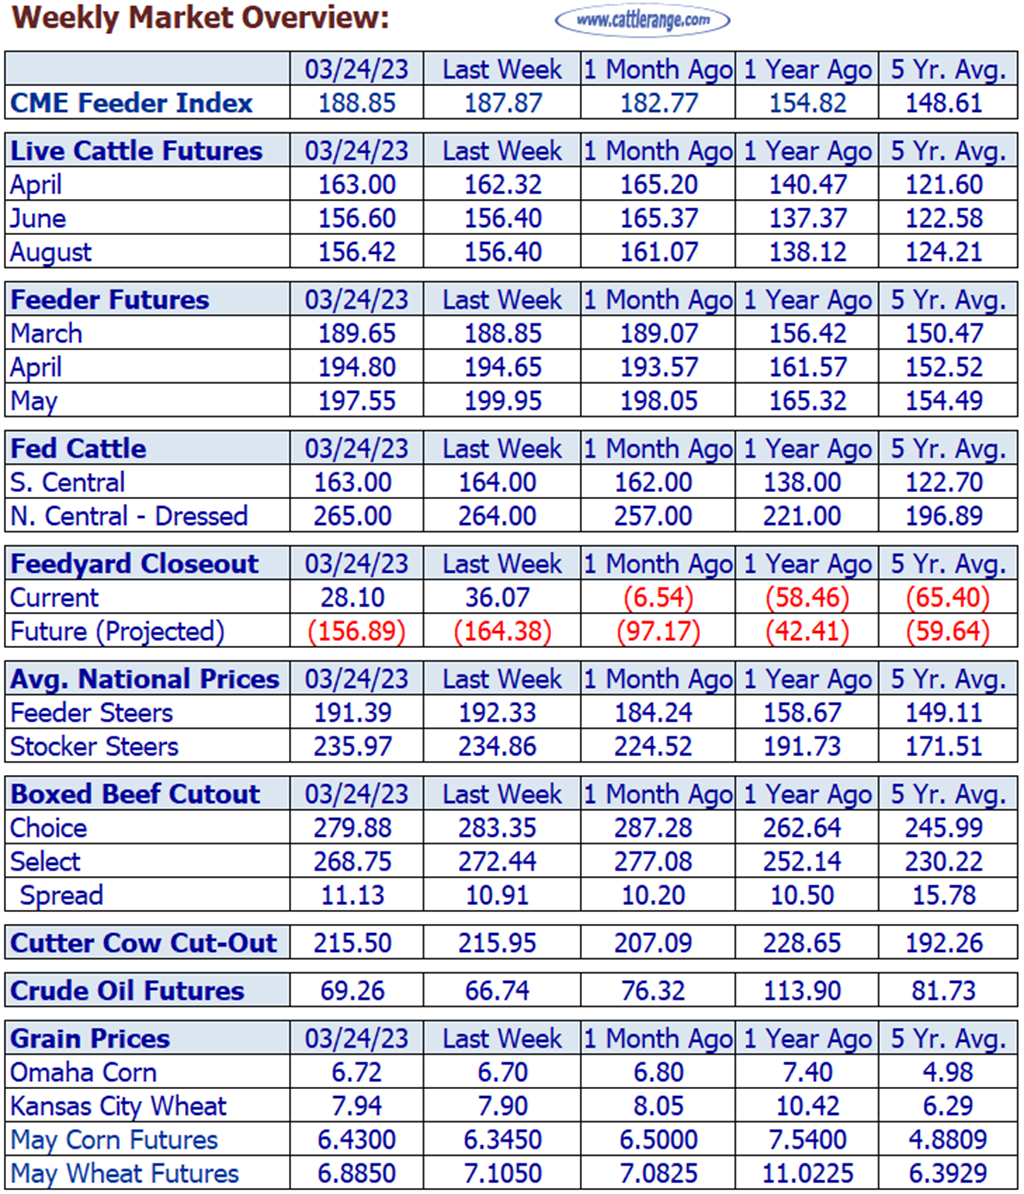 Weekly Cattle Market Overview for Week Ending 3/24/23